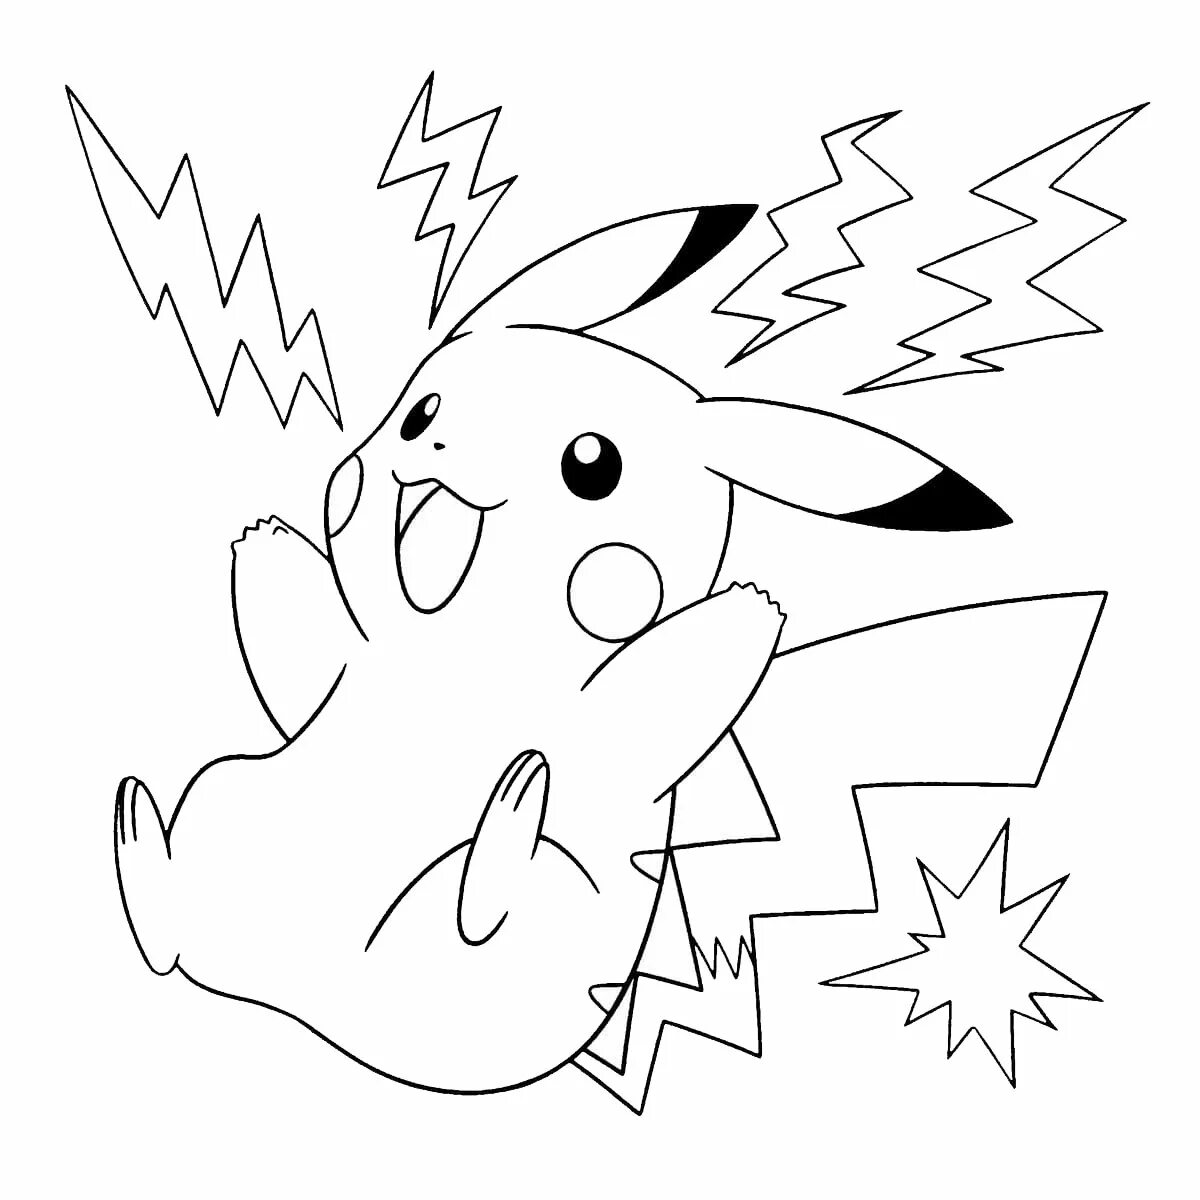 Exciting pikachu seal coloring page